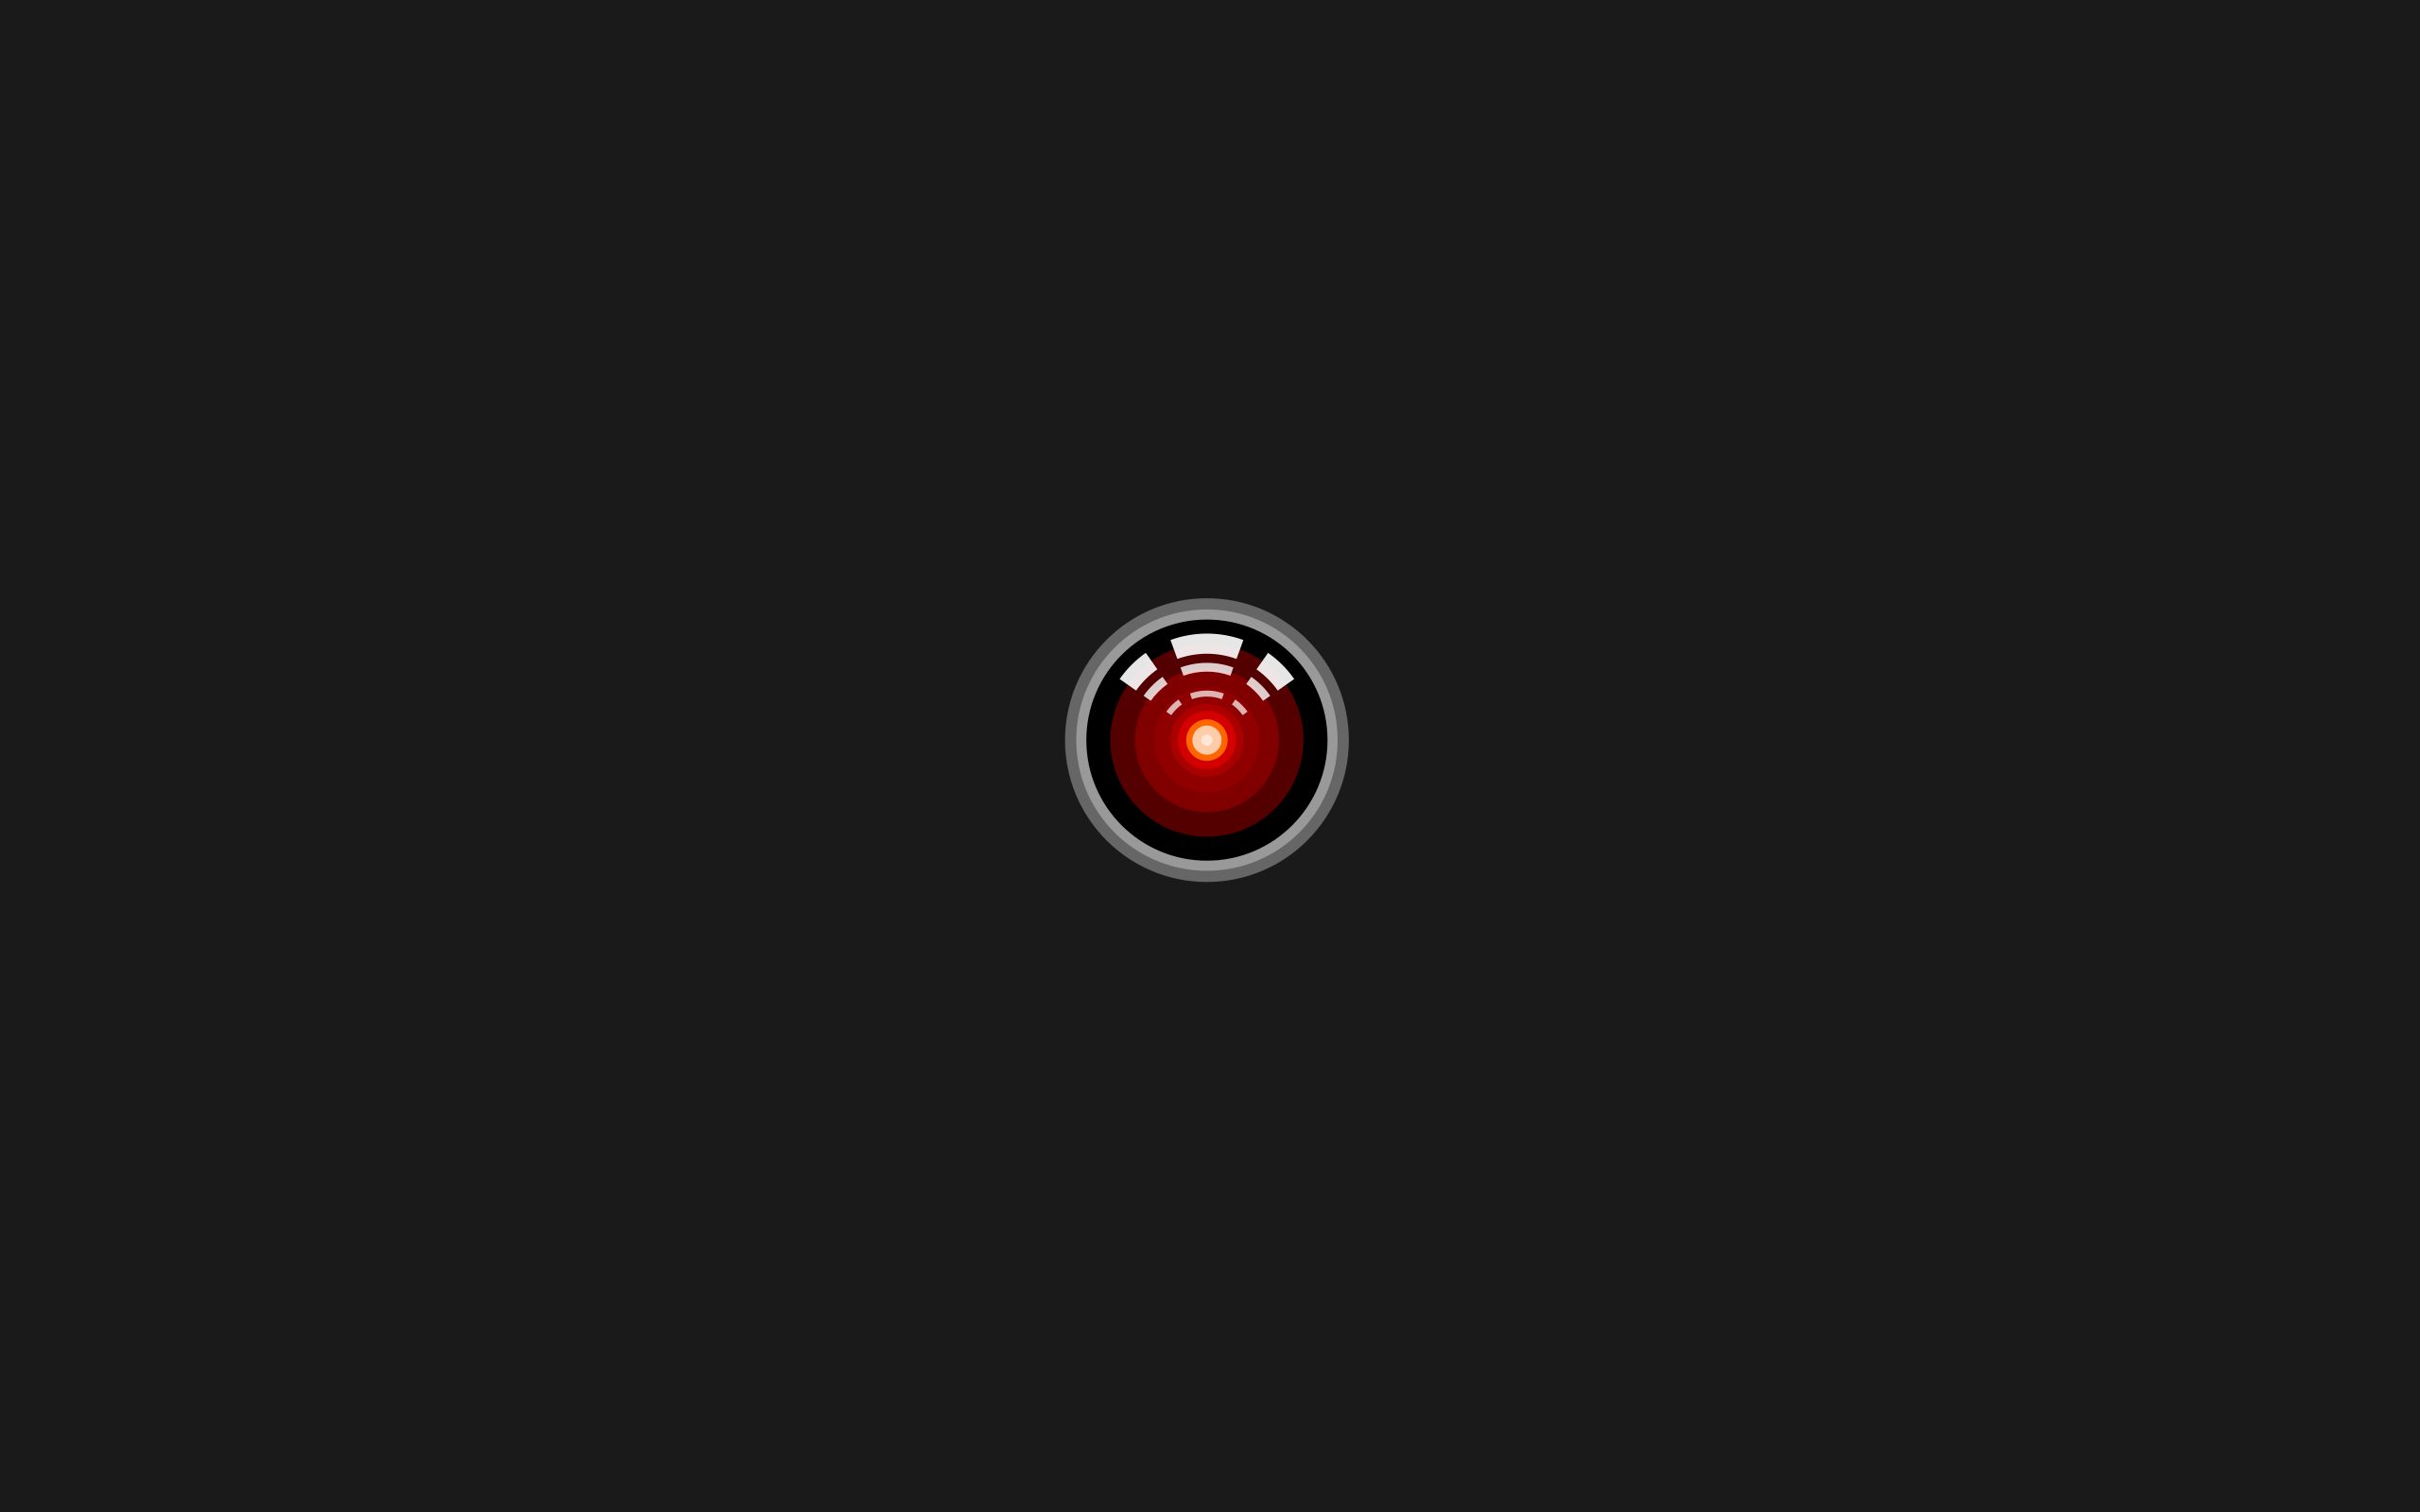 General 2560x1600 2001: A Space Odyssey HAL 9000 minimalism movies Stanley Kubrick science fiction computer